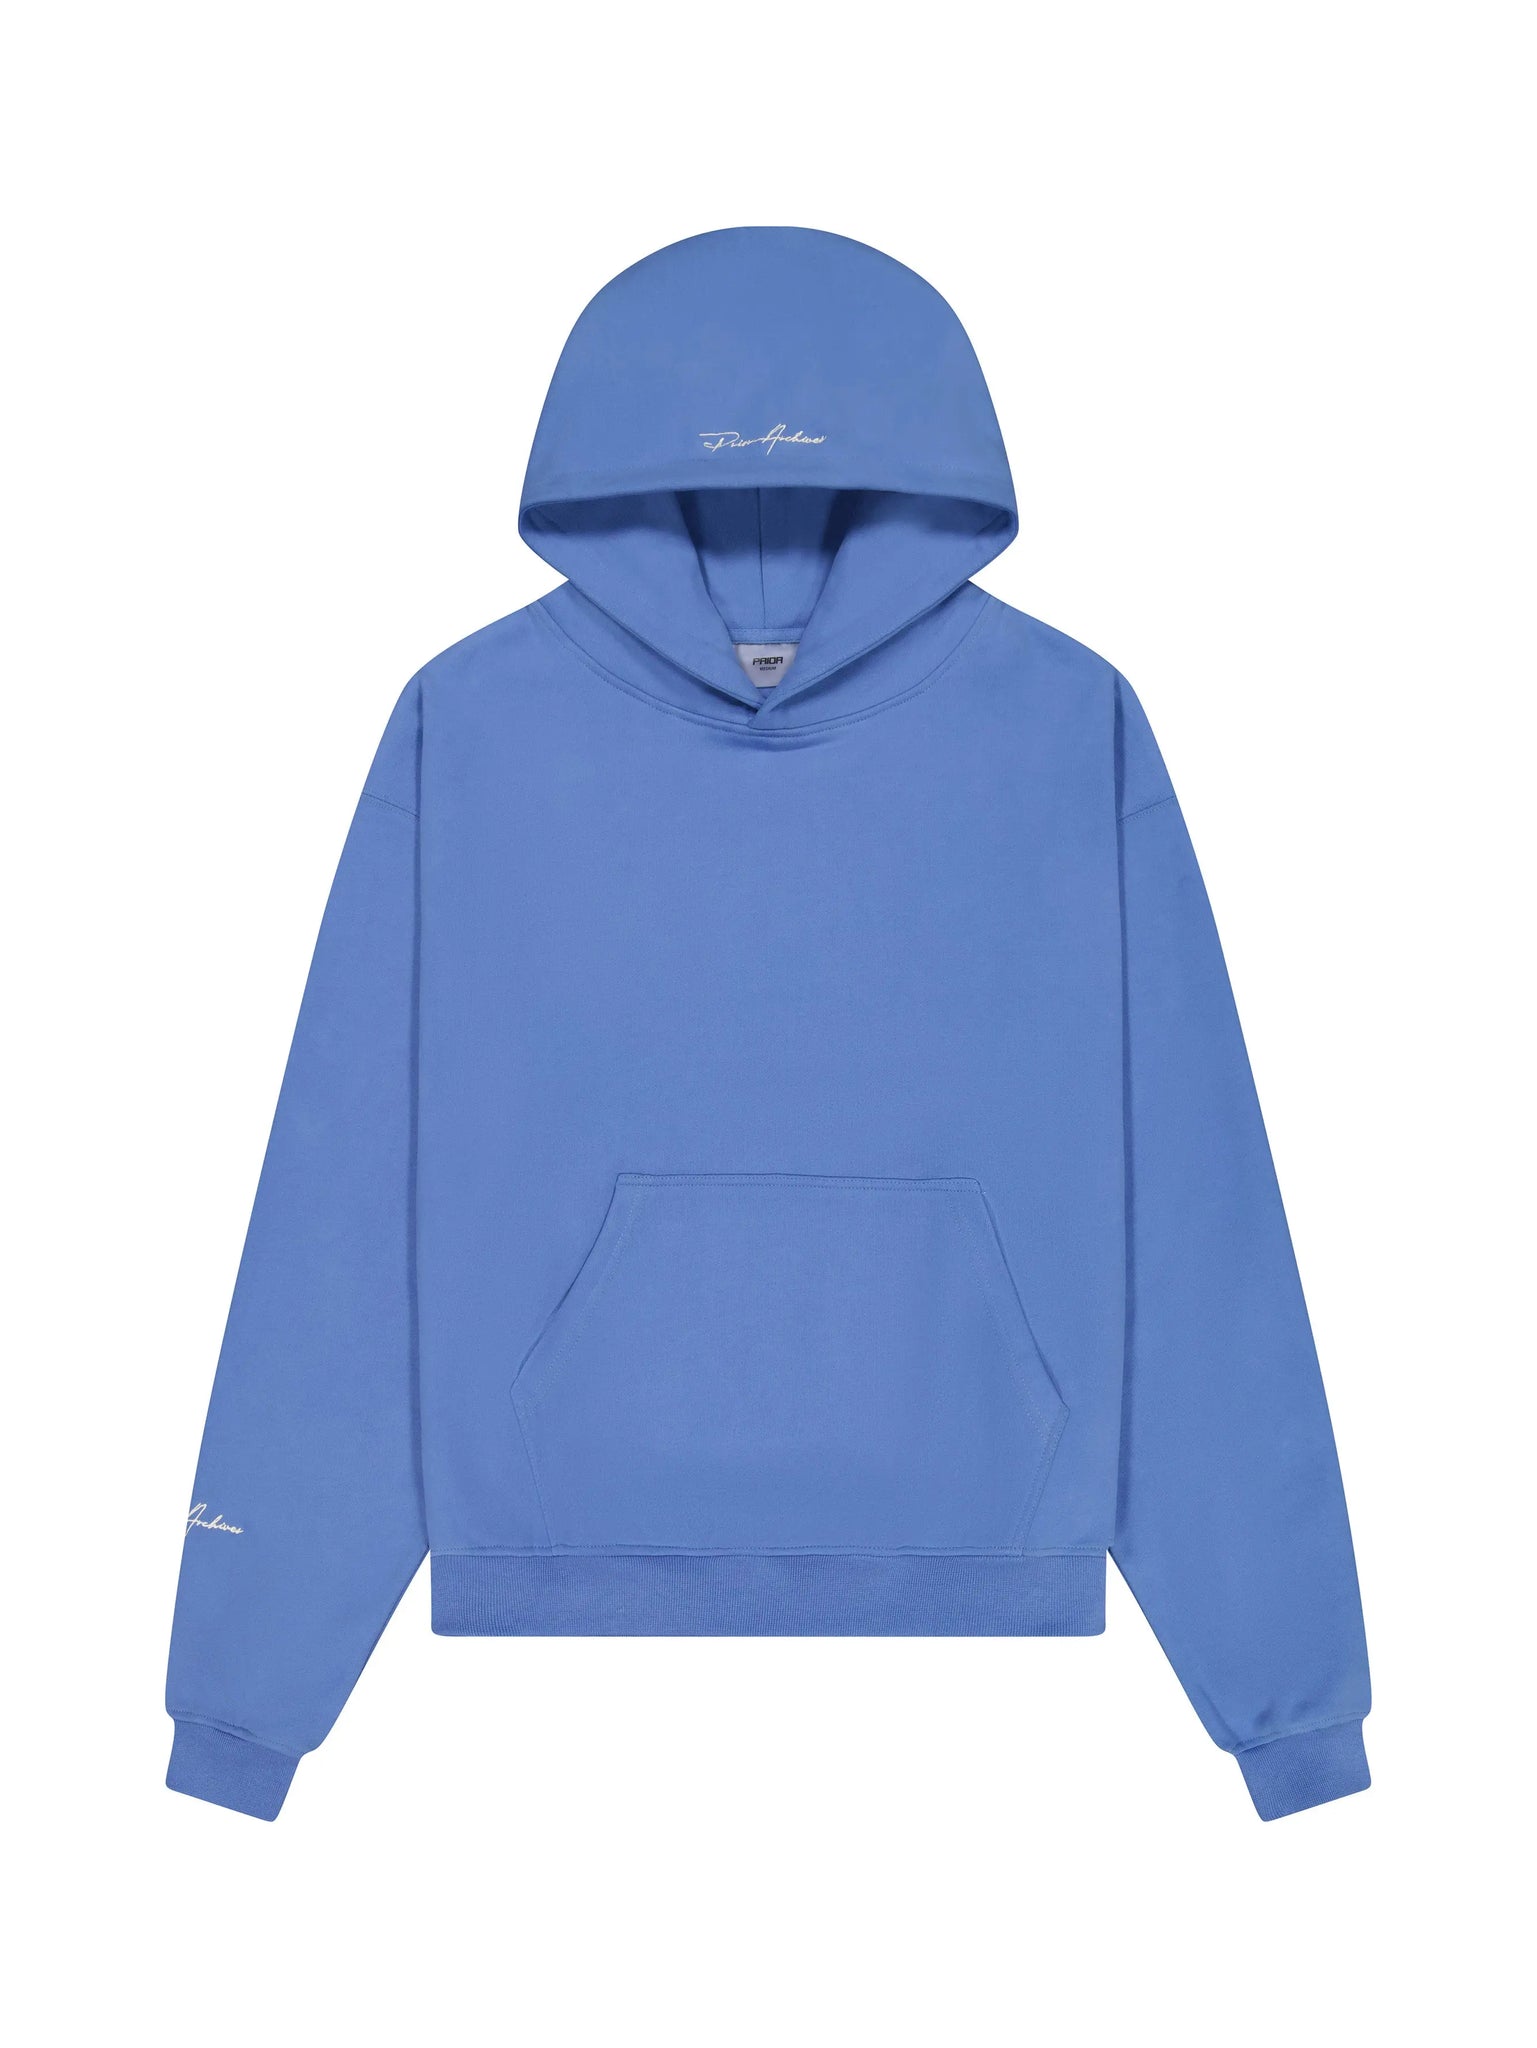 Prior Embroidery Logo Oversized Hoodie Faded Azure in Auckland, New Zealand - Shop name